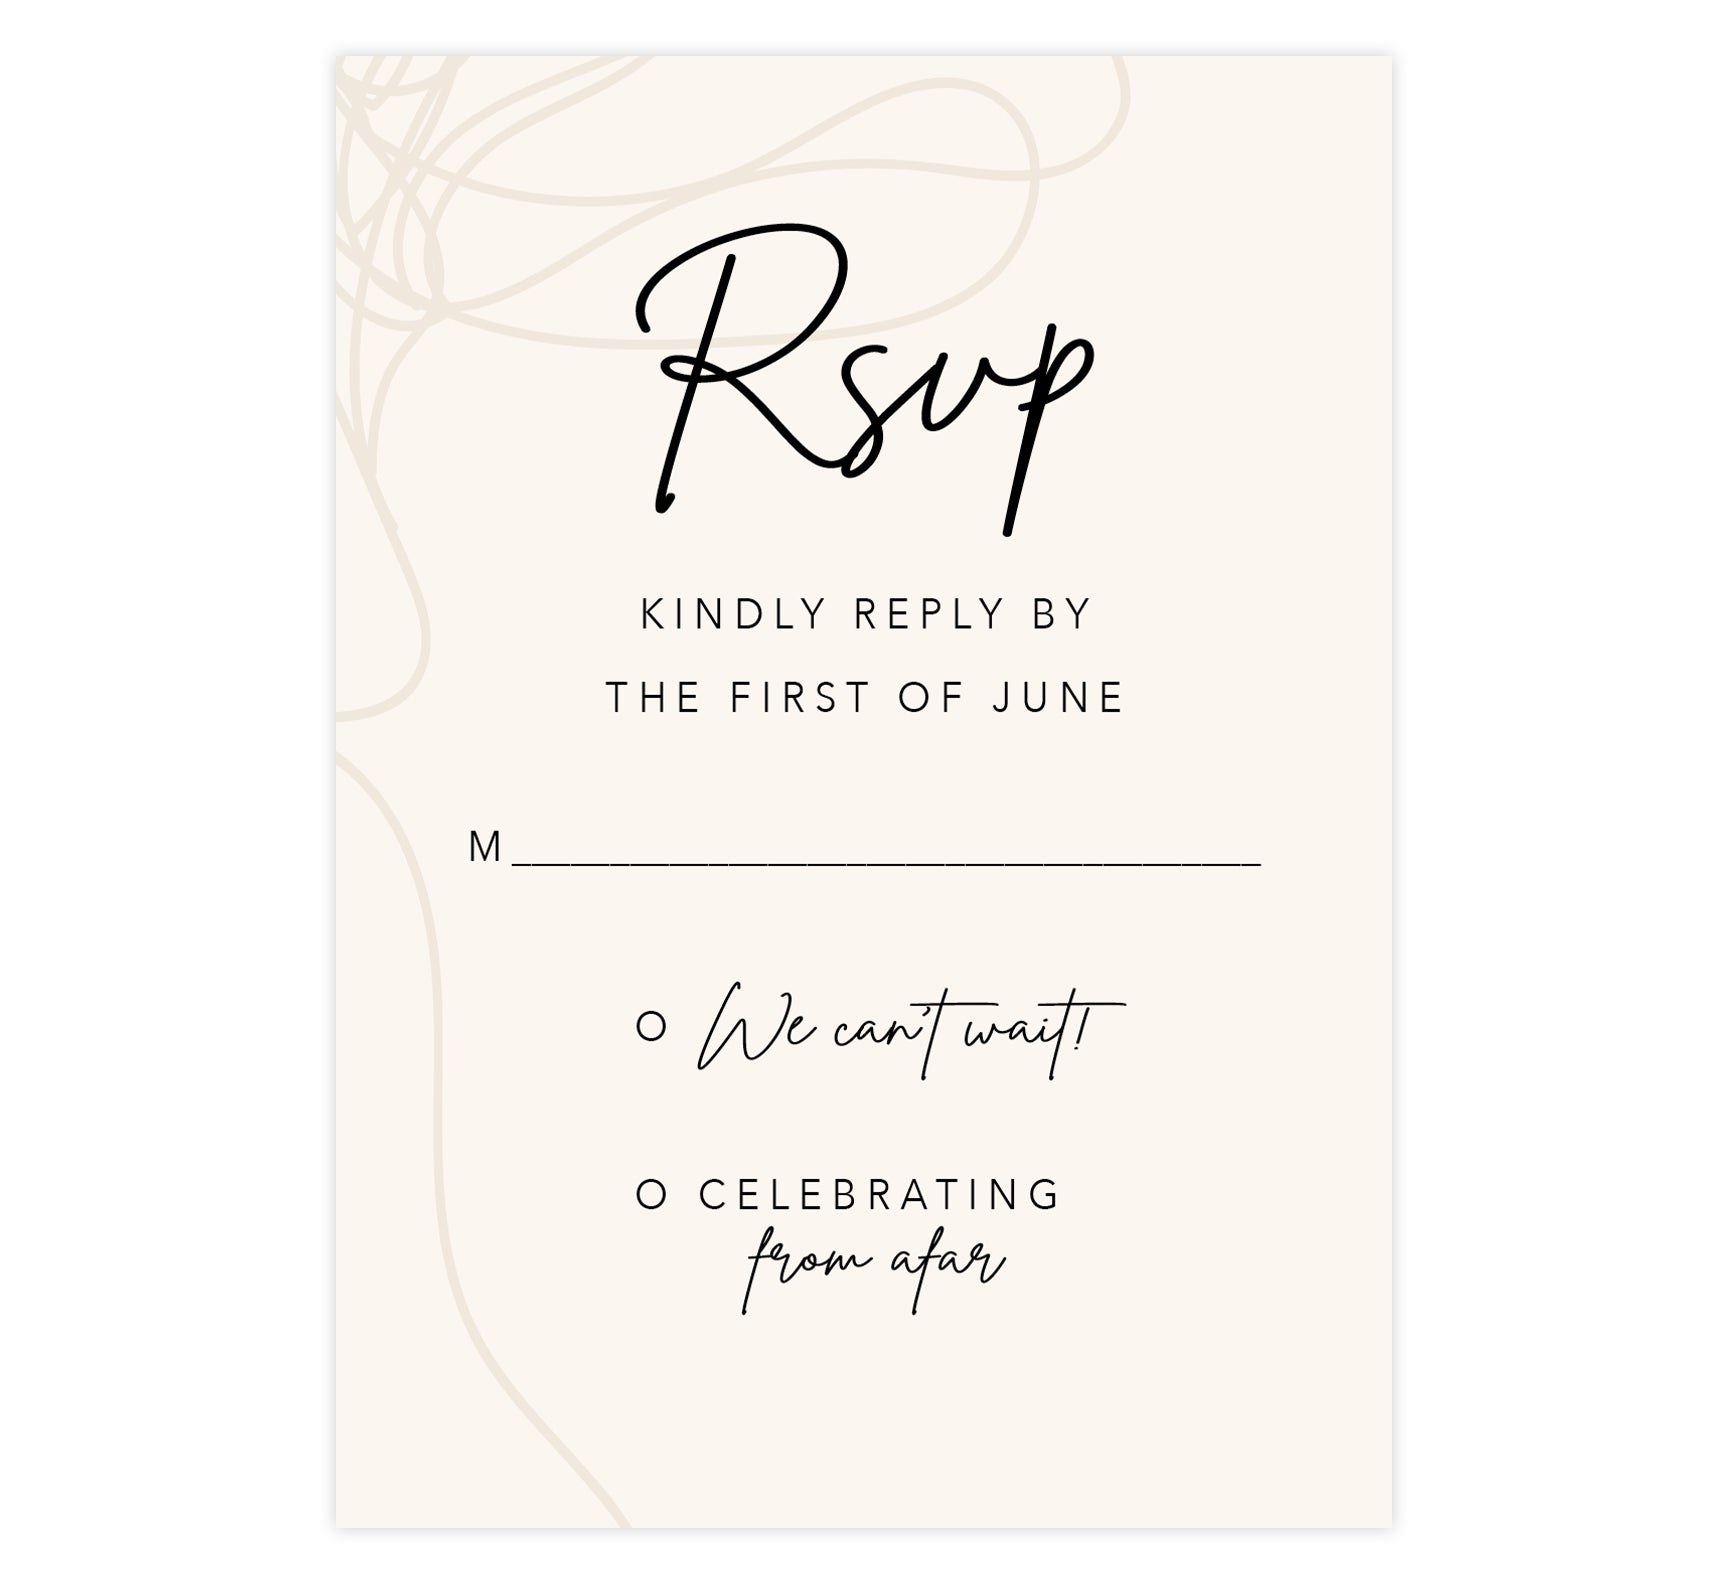 Modern Handwriting wedding response card; creme background with tan drawn design on the left edge and black writing